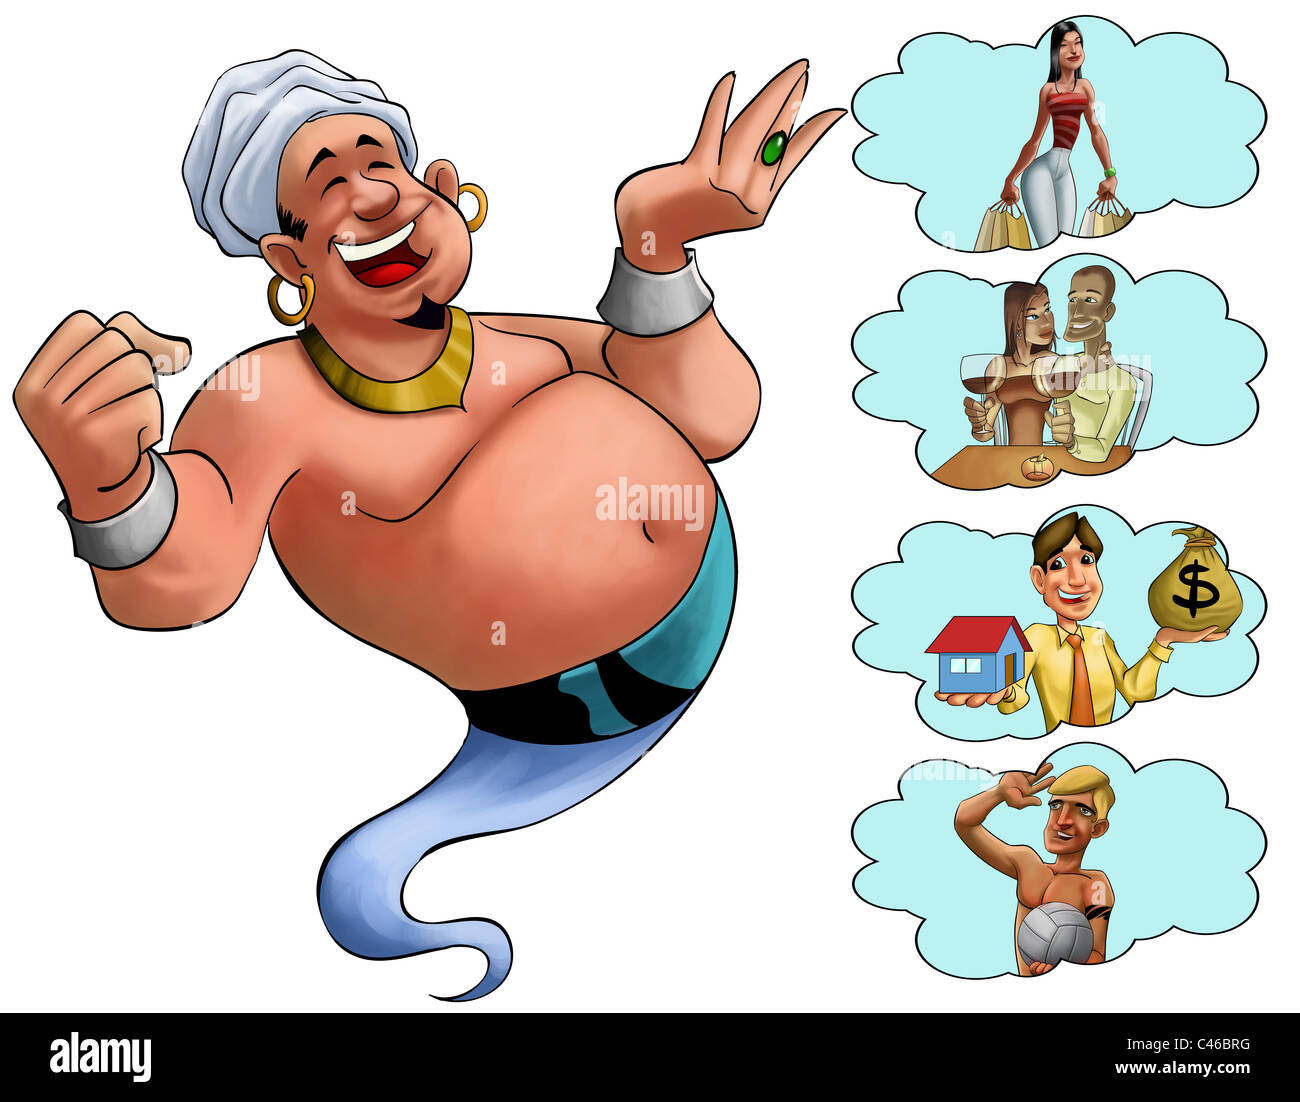 happy fat genie smiley in the moment when he appears Stock Photo